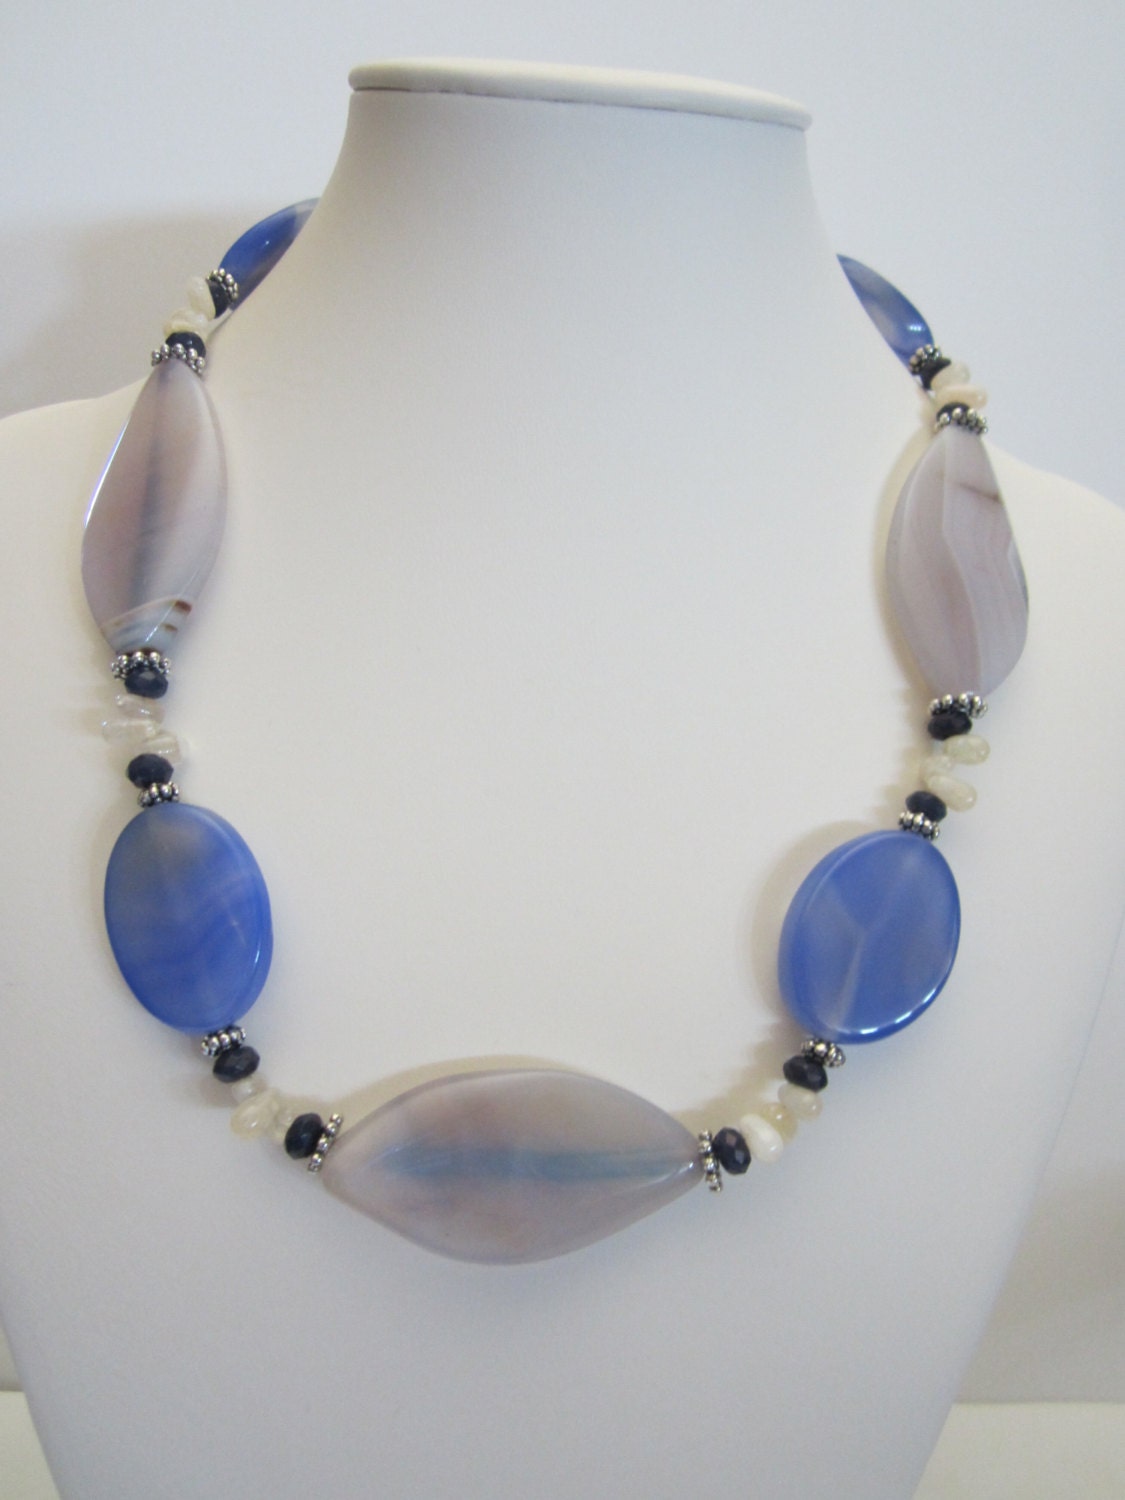 Blue Agate Necklace With Citrine Teardrops and Faceted Iolite Rondelles ...